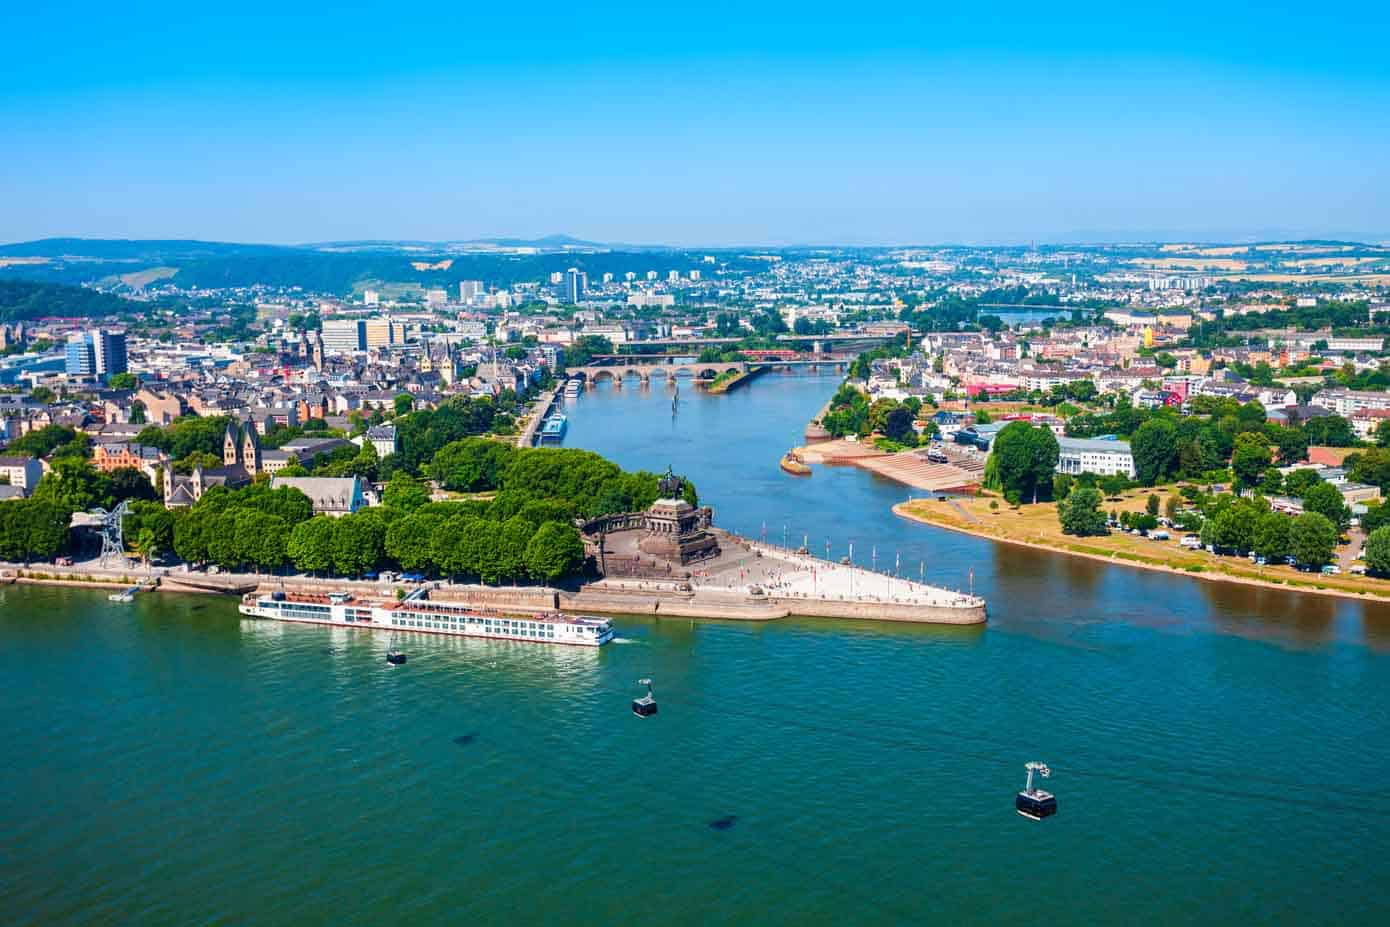 Skyline of Koblenz, Germany with the Rhine River and Mosel River in view.